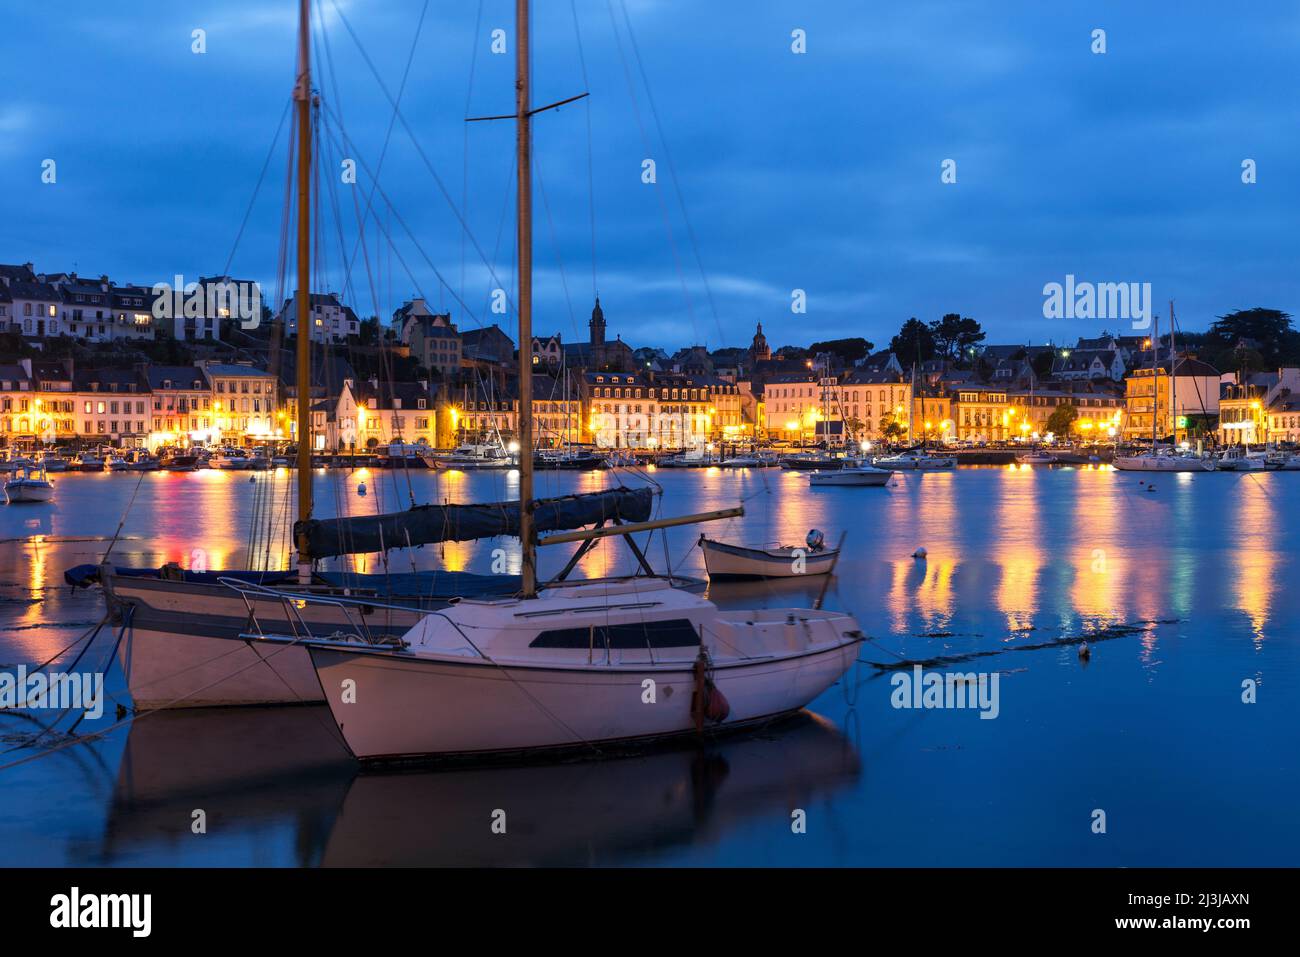 Evening atmosphere in the harbor of Audierne, residential and commercial buildings in the harbor district, France, Brittany, Département Finistère Stock Photo